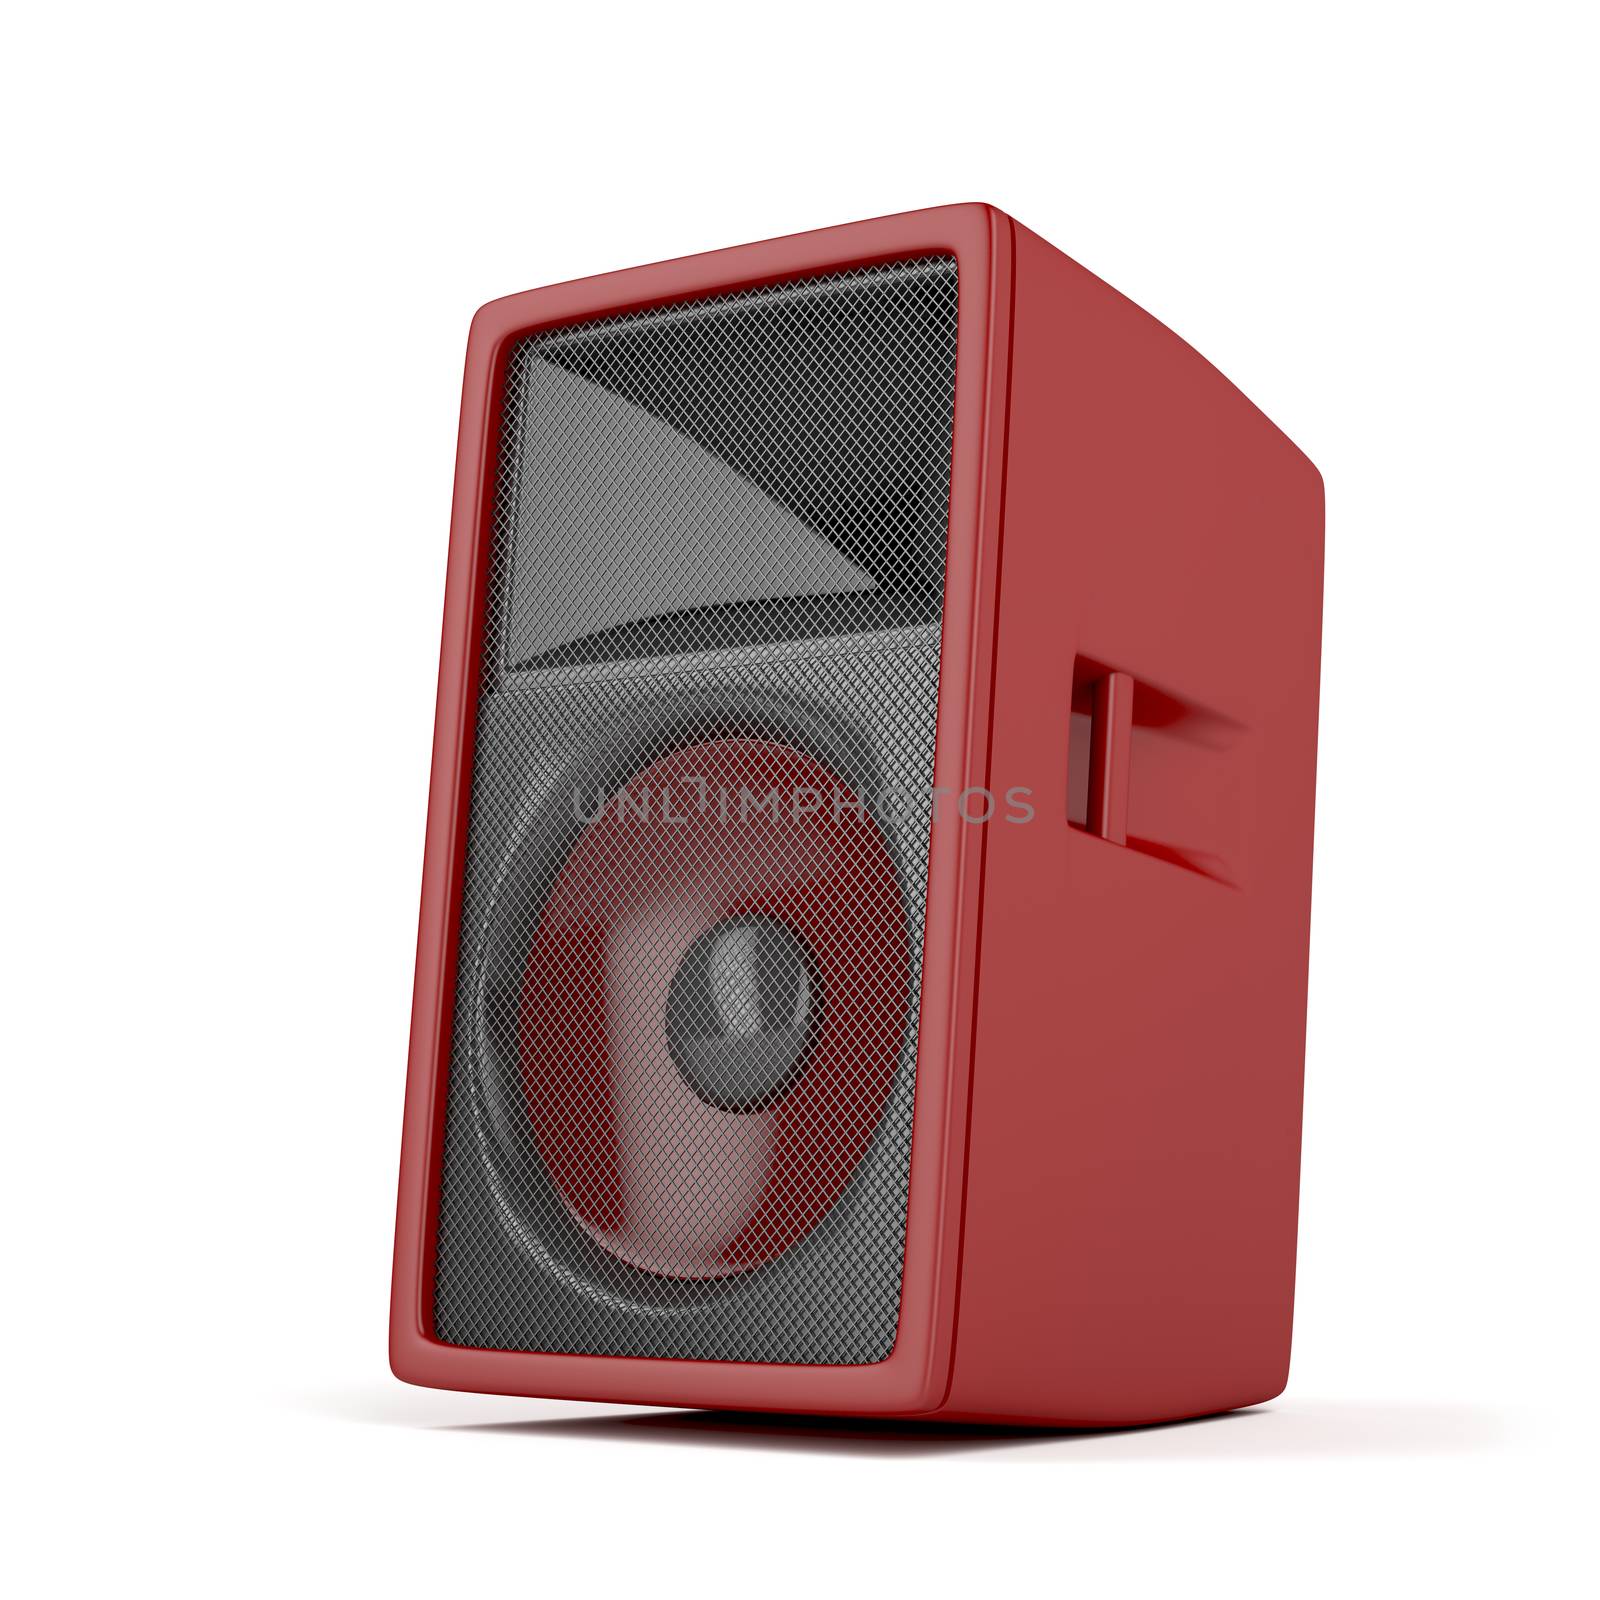 Big red loudspeaker by magraphics